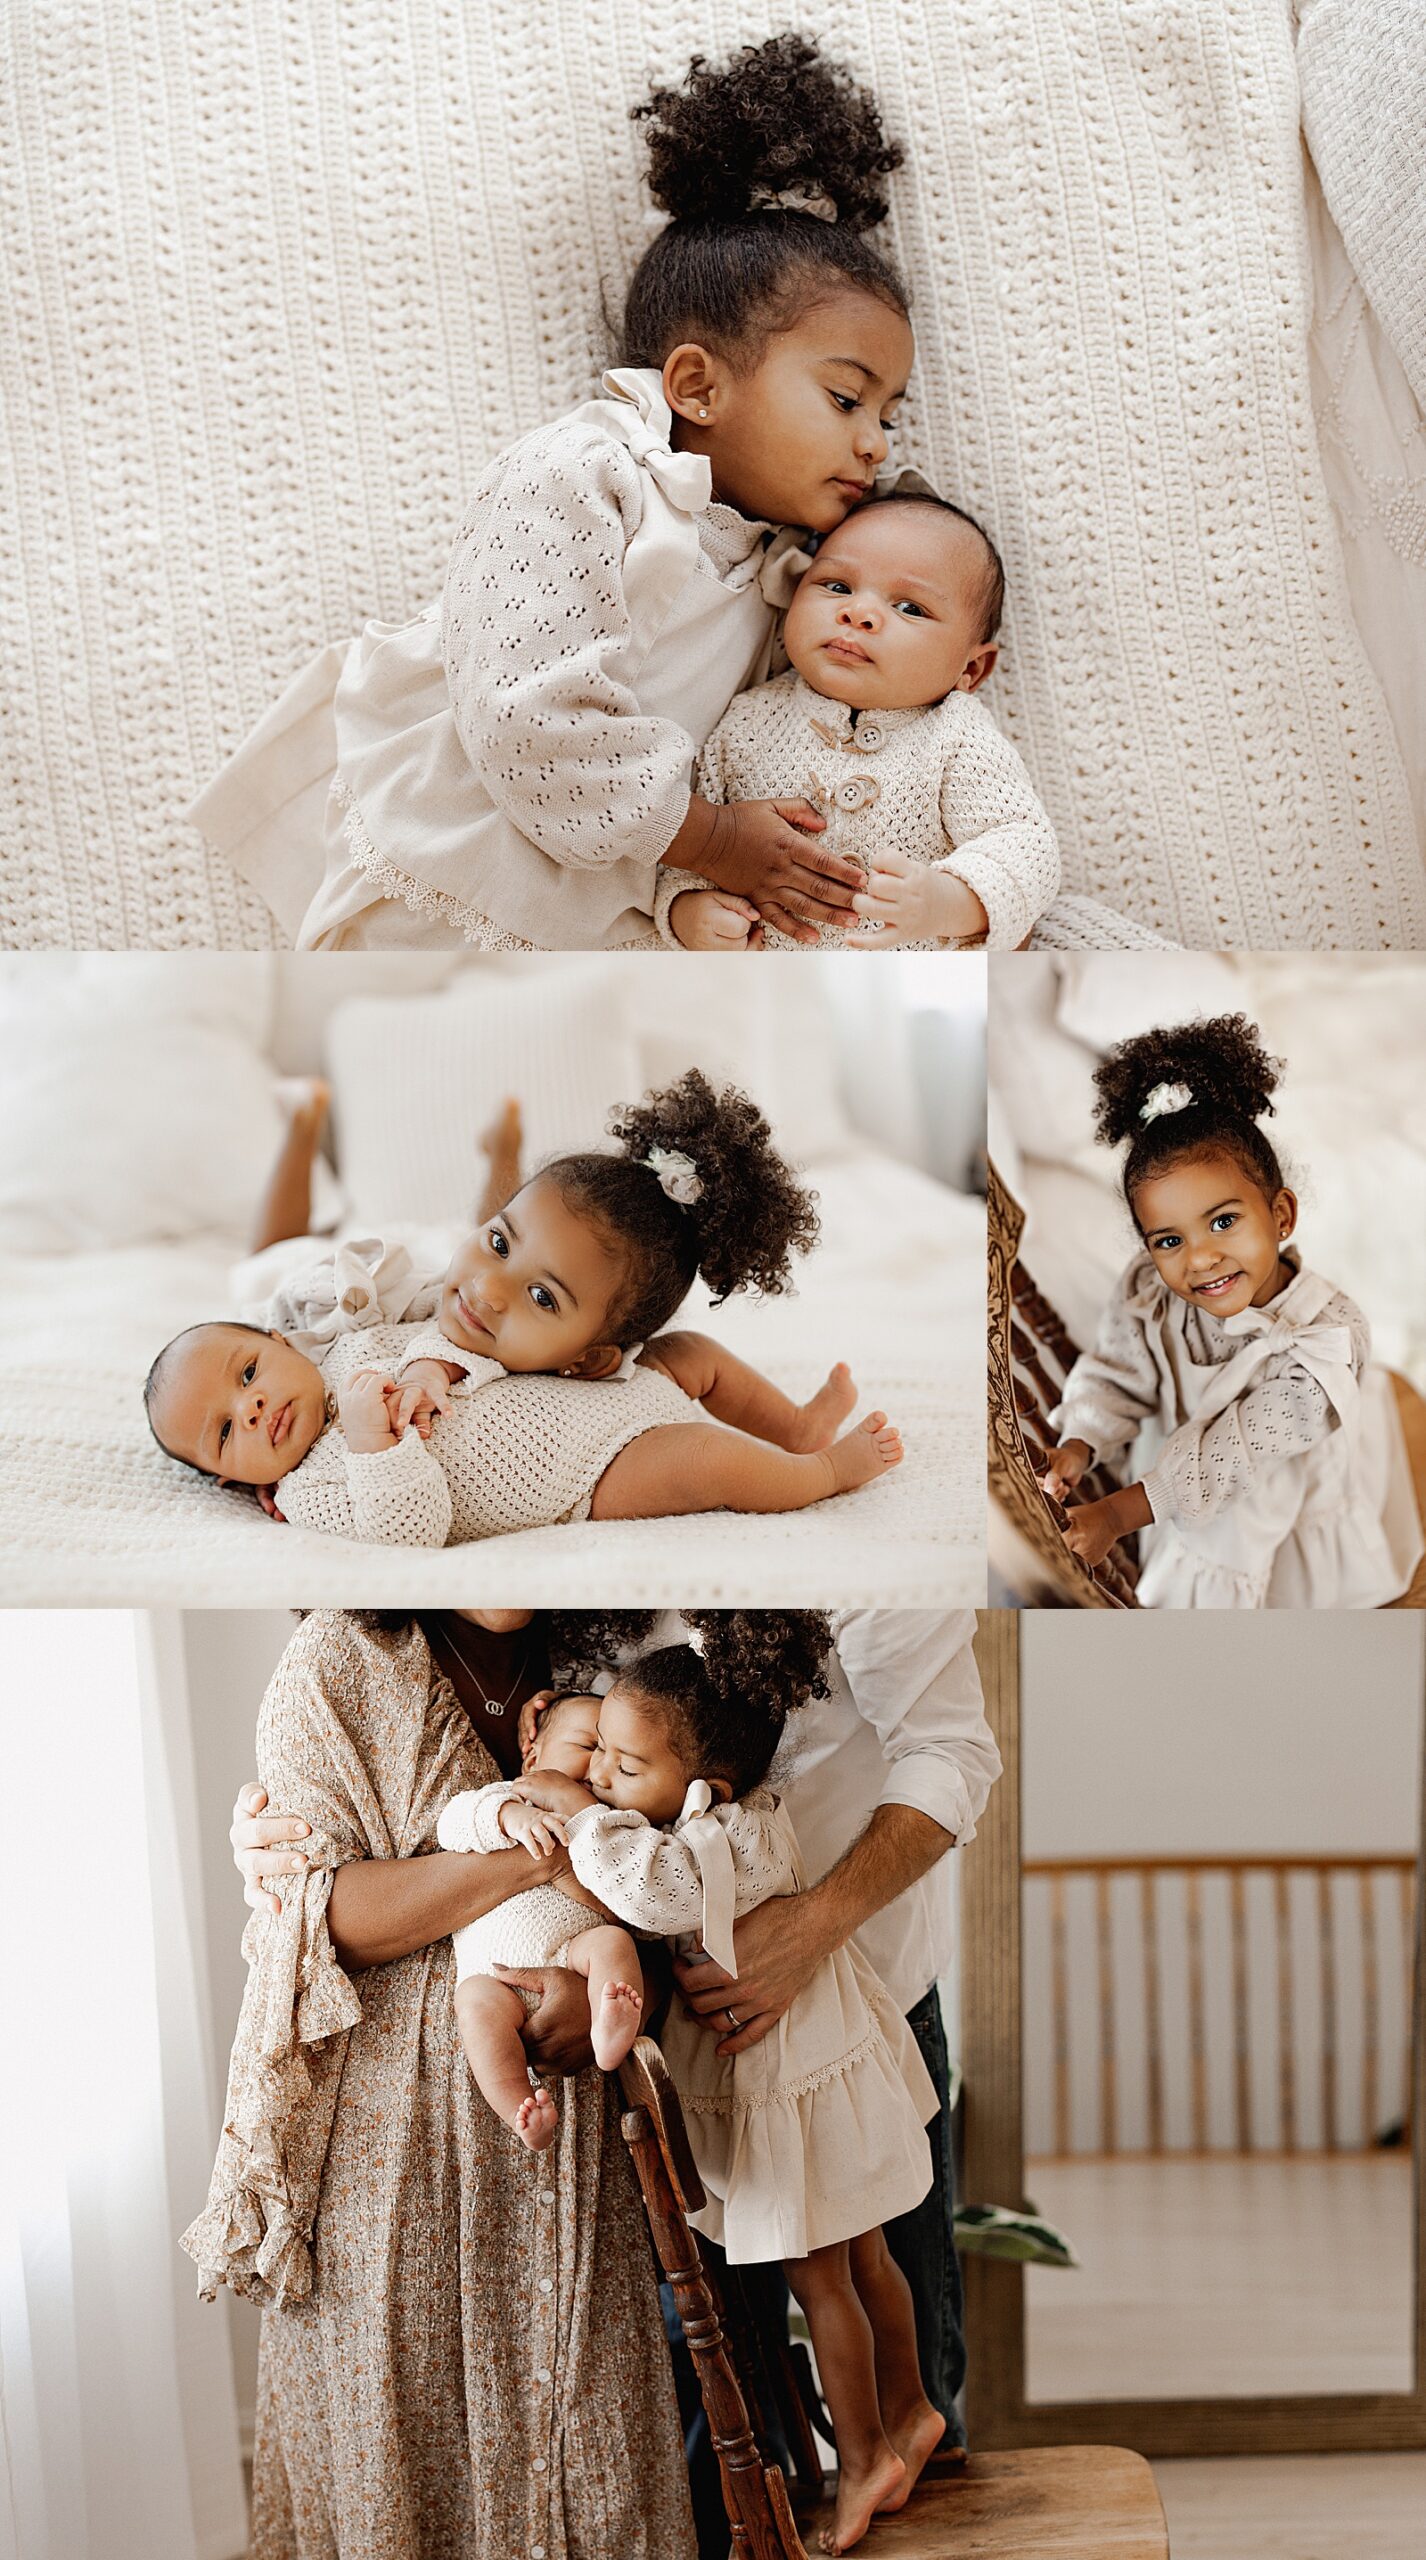 family cuddle baby together during their Lifestyle Newborn Session